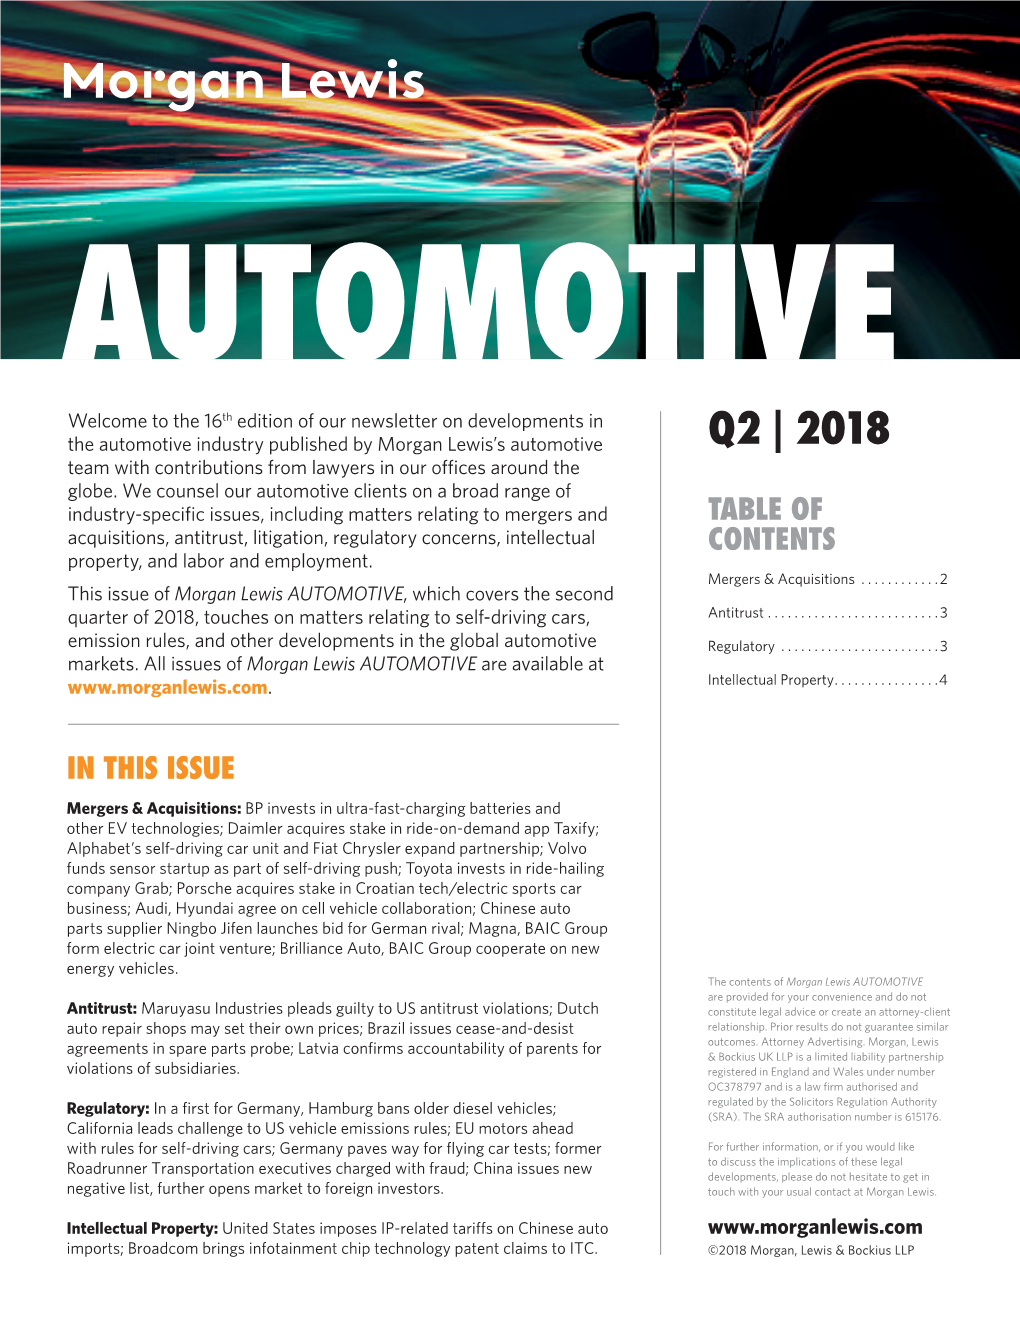 Read the Latest Issue of Morgan Lewis Automotive